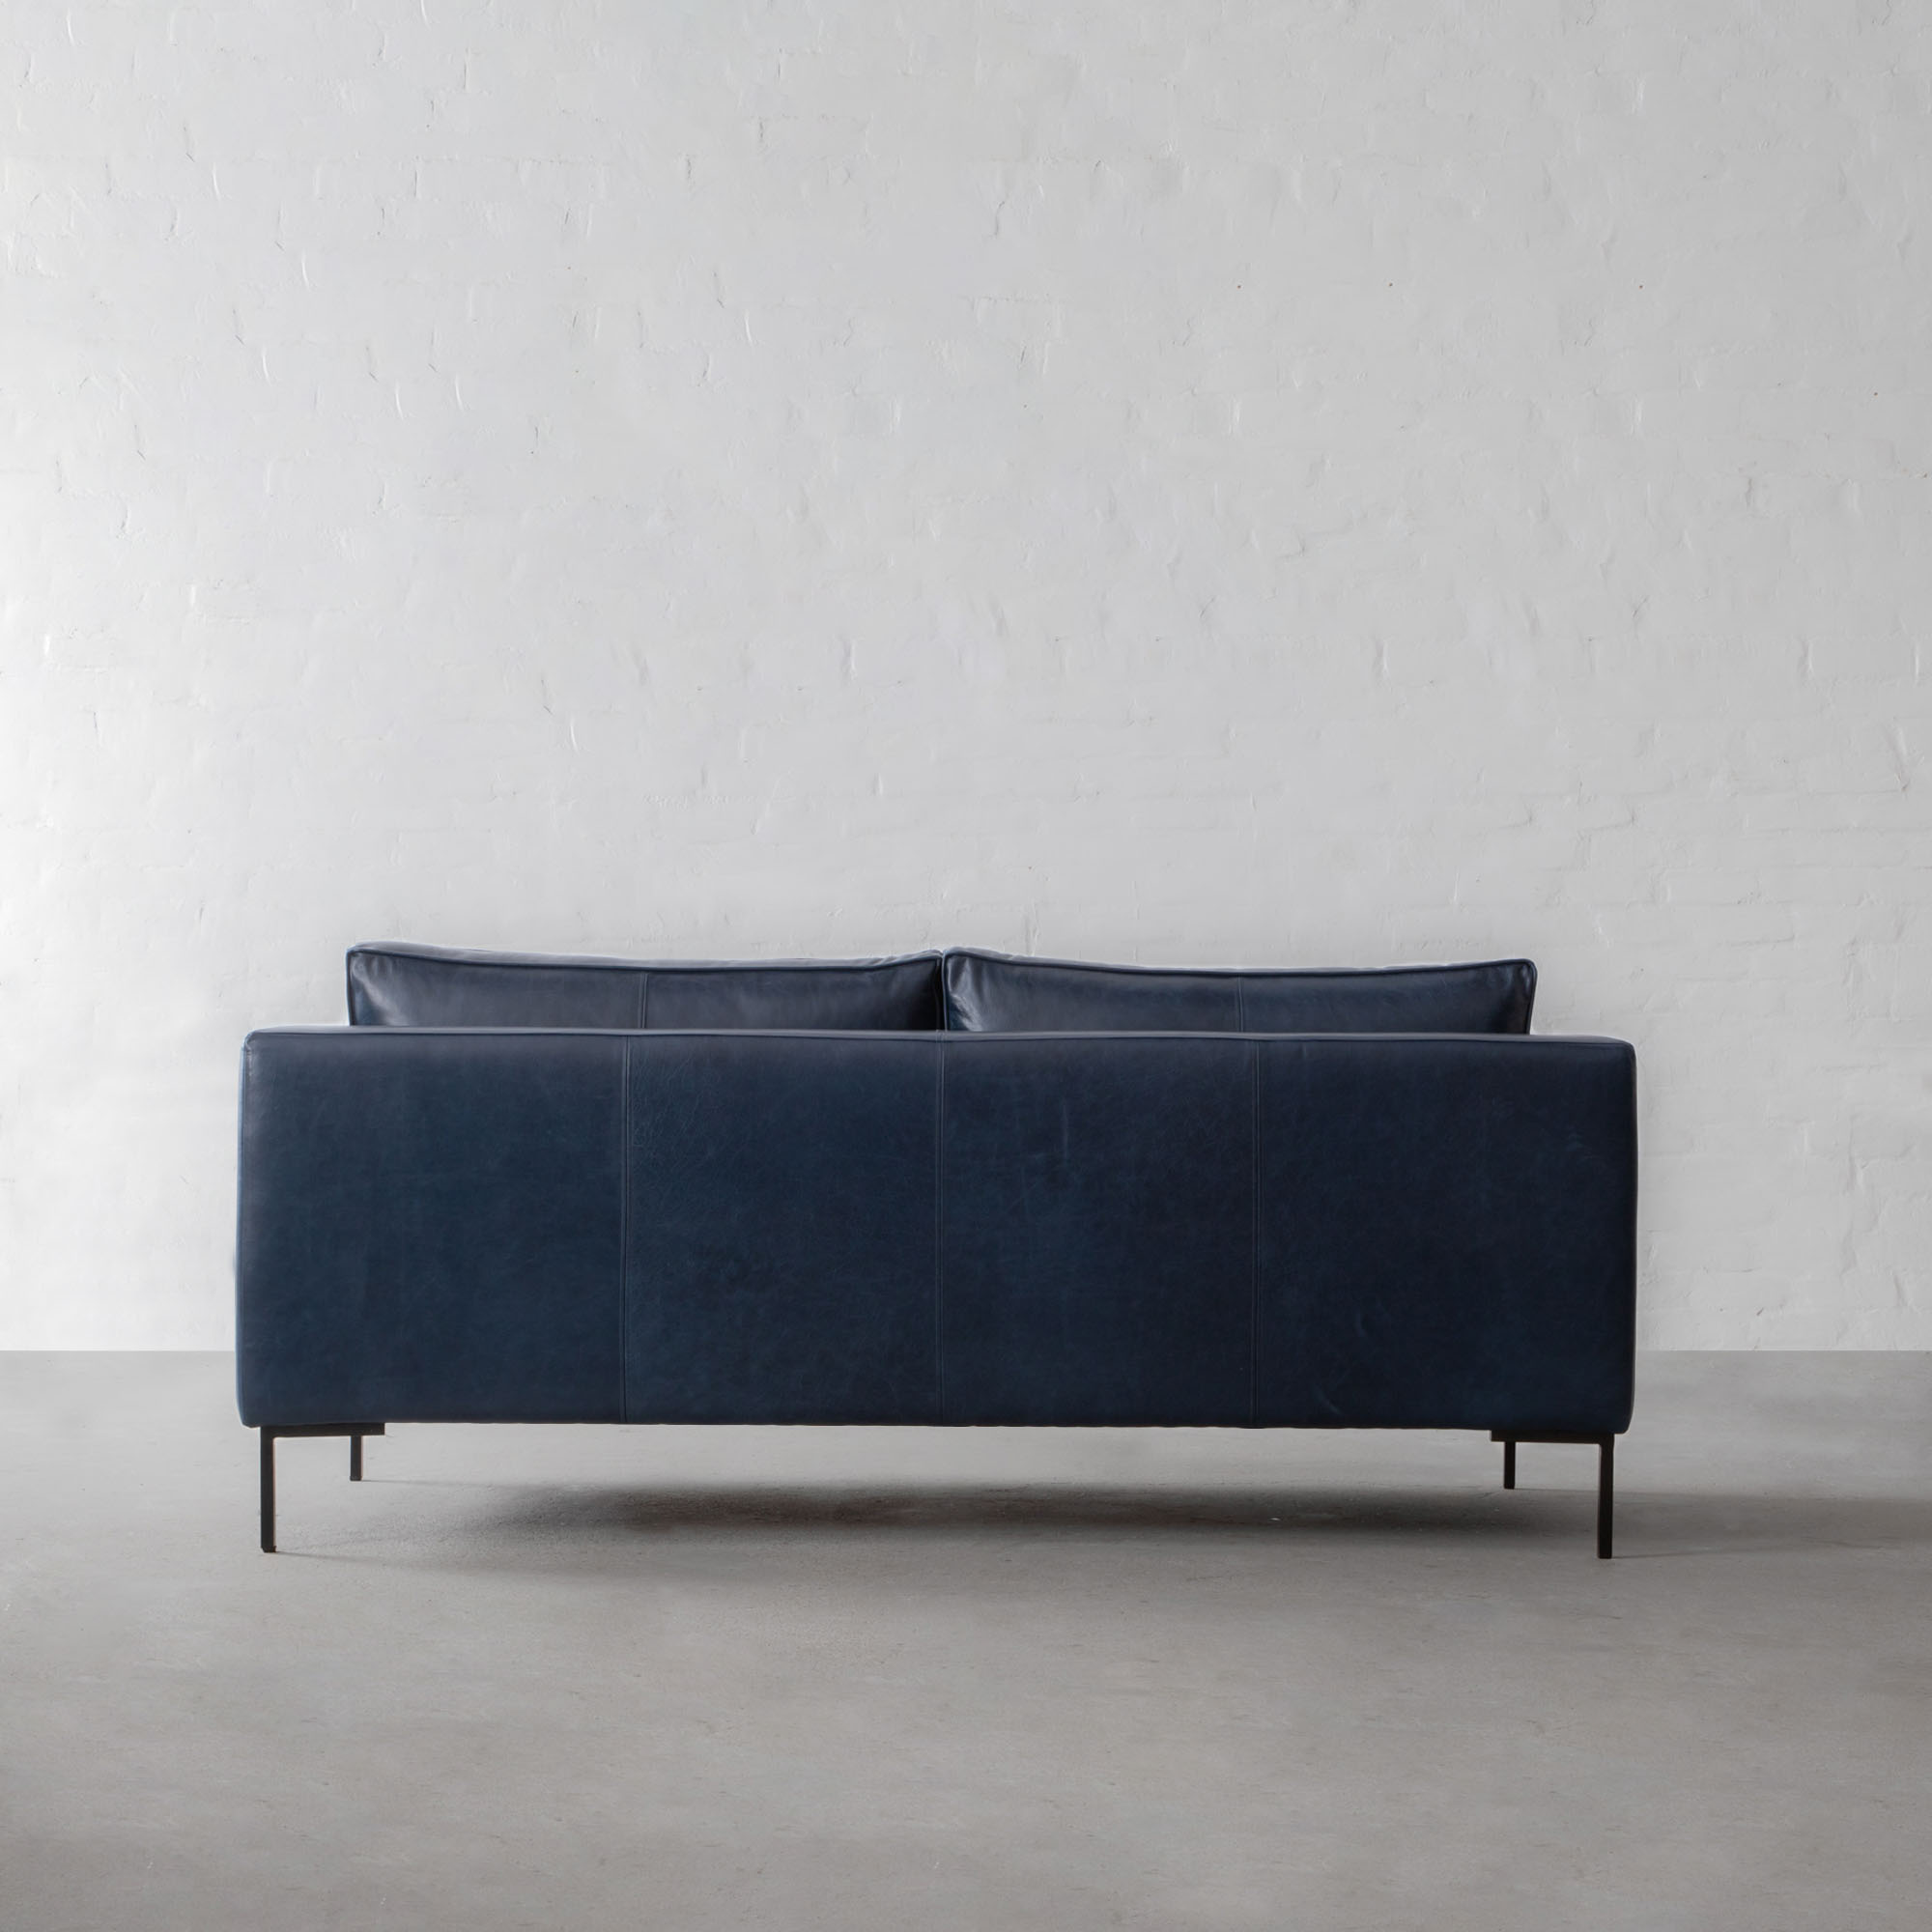 L.A Leather Sofa Collection